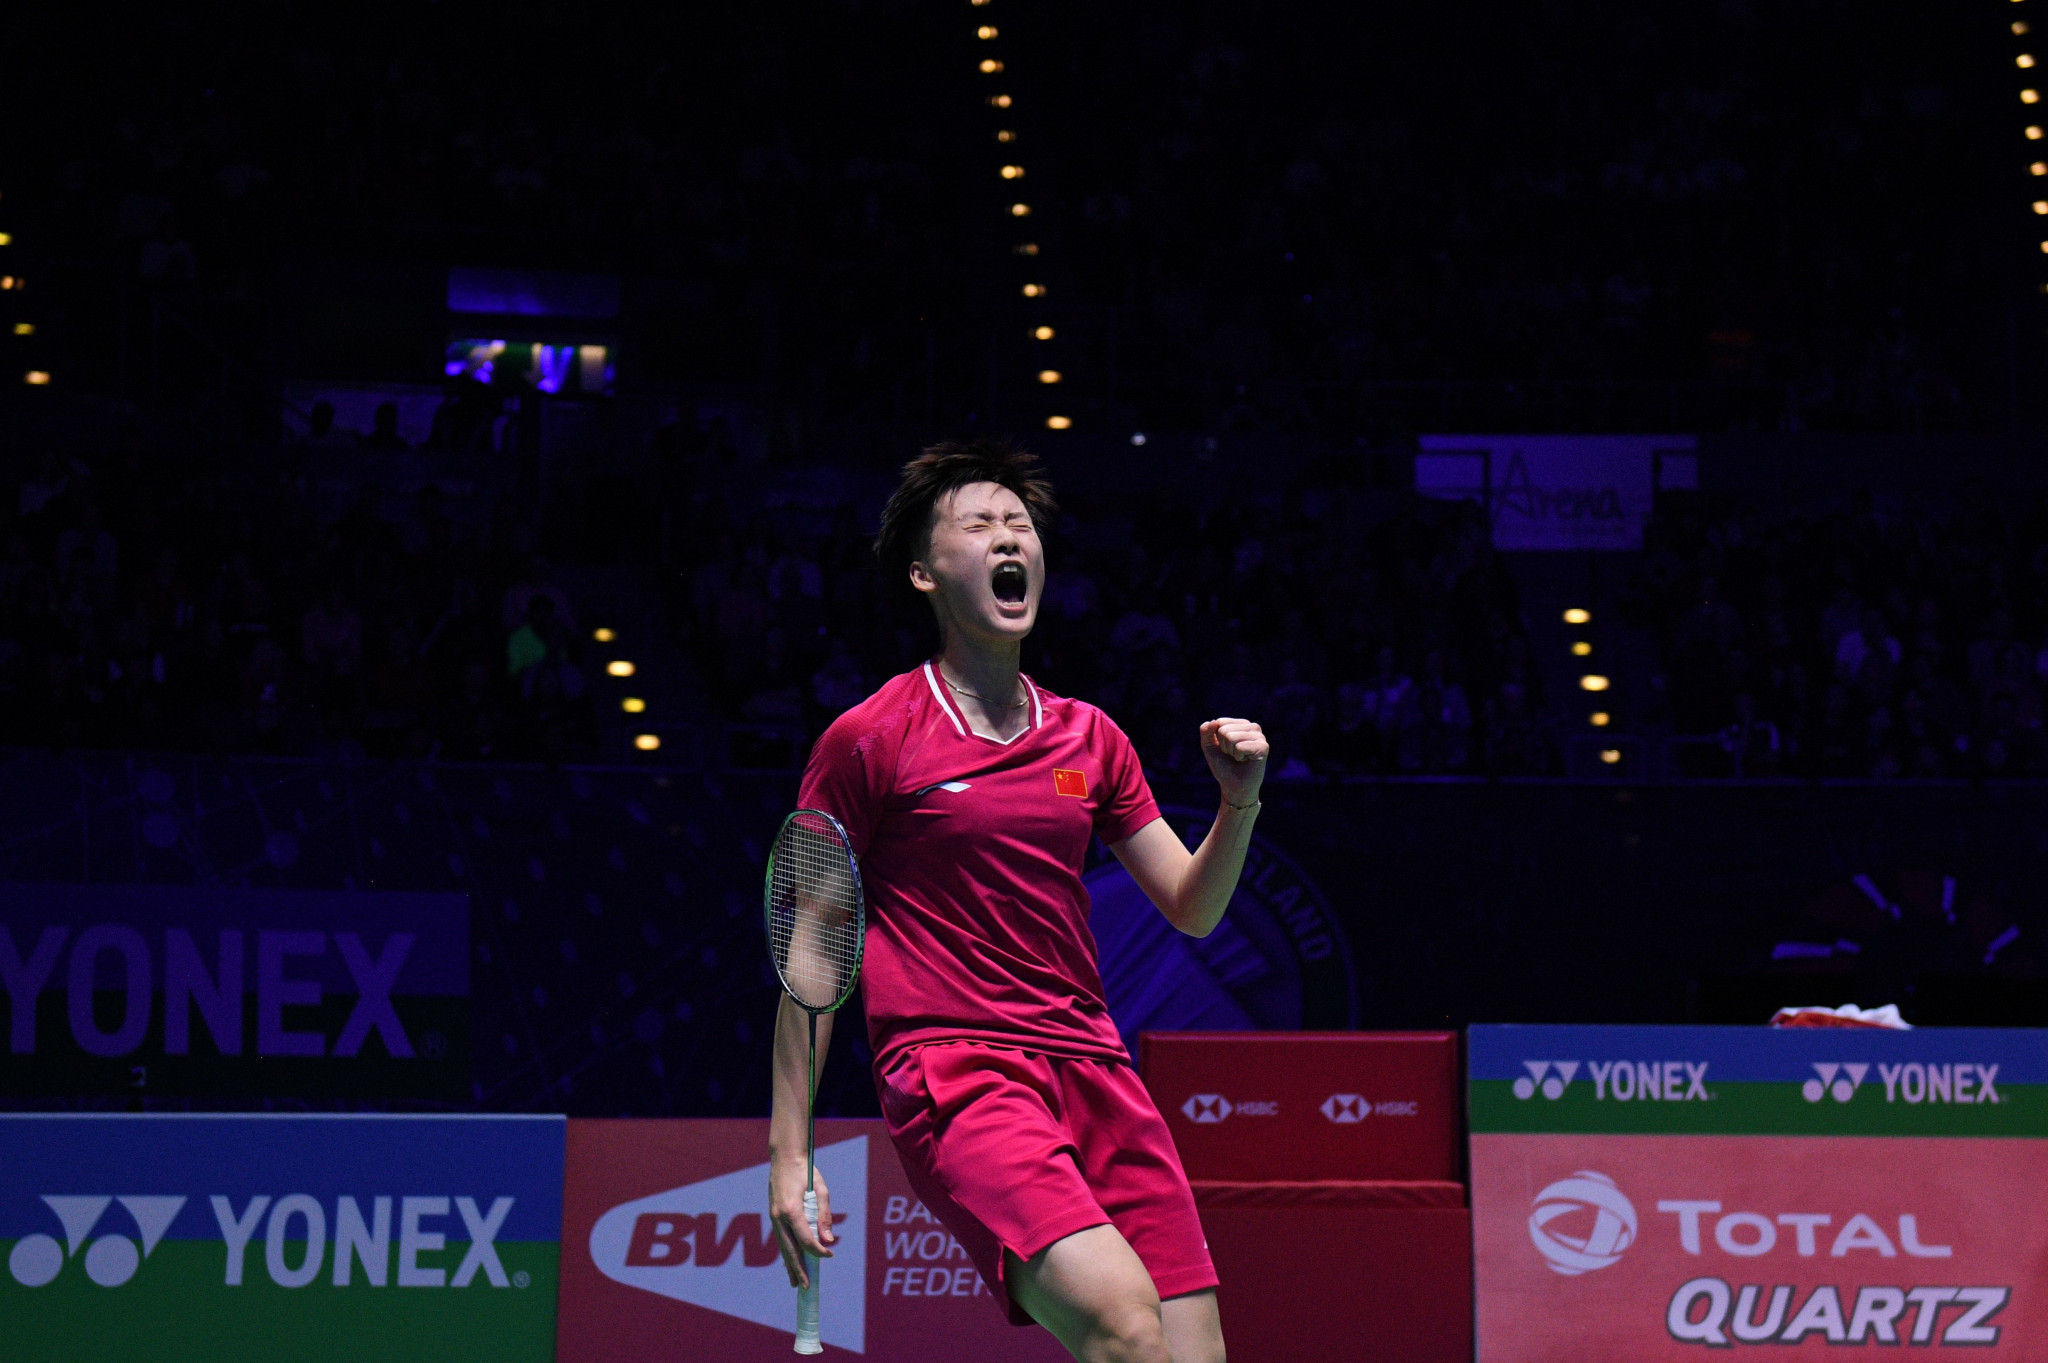 Chen on course for second successive BWF World Tour win after round two victory at Swiss Open